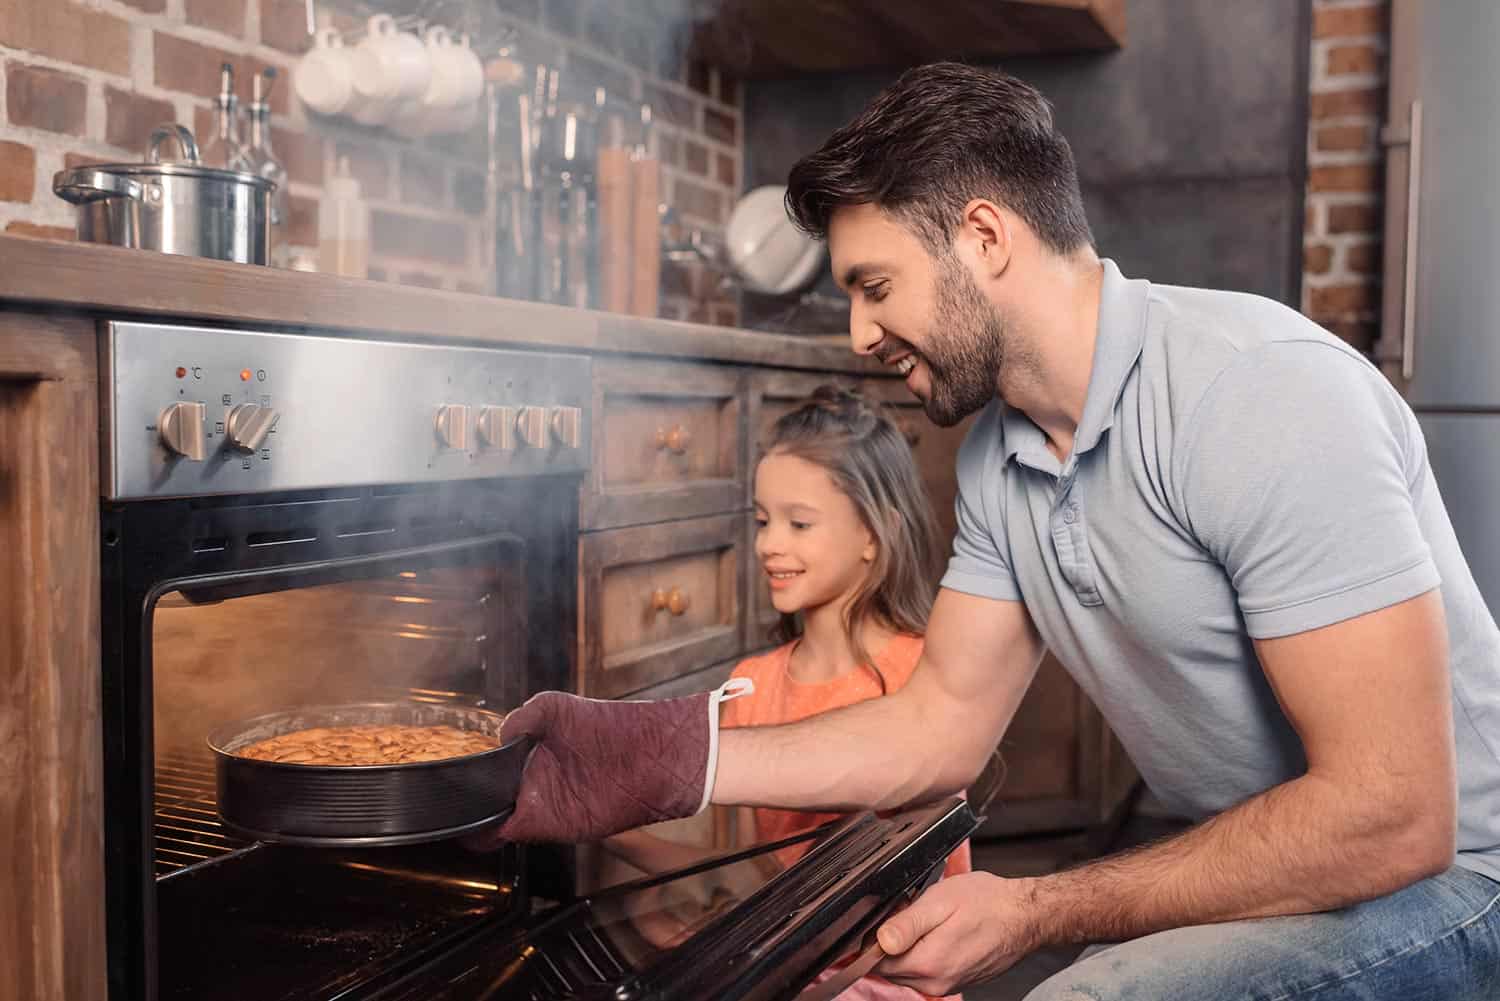 Smiling father and daughter taking cake from oven